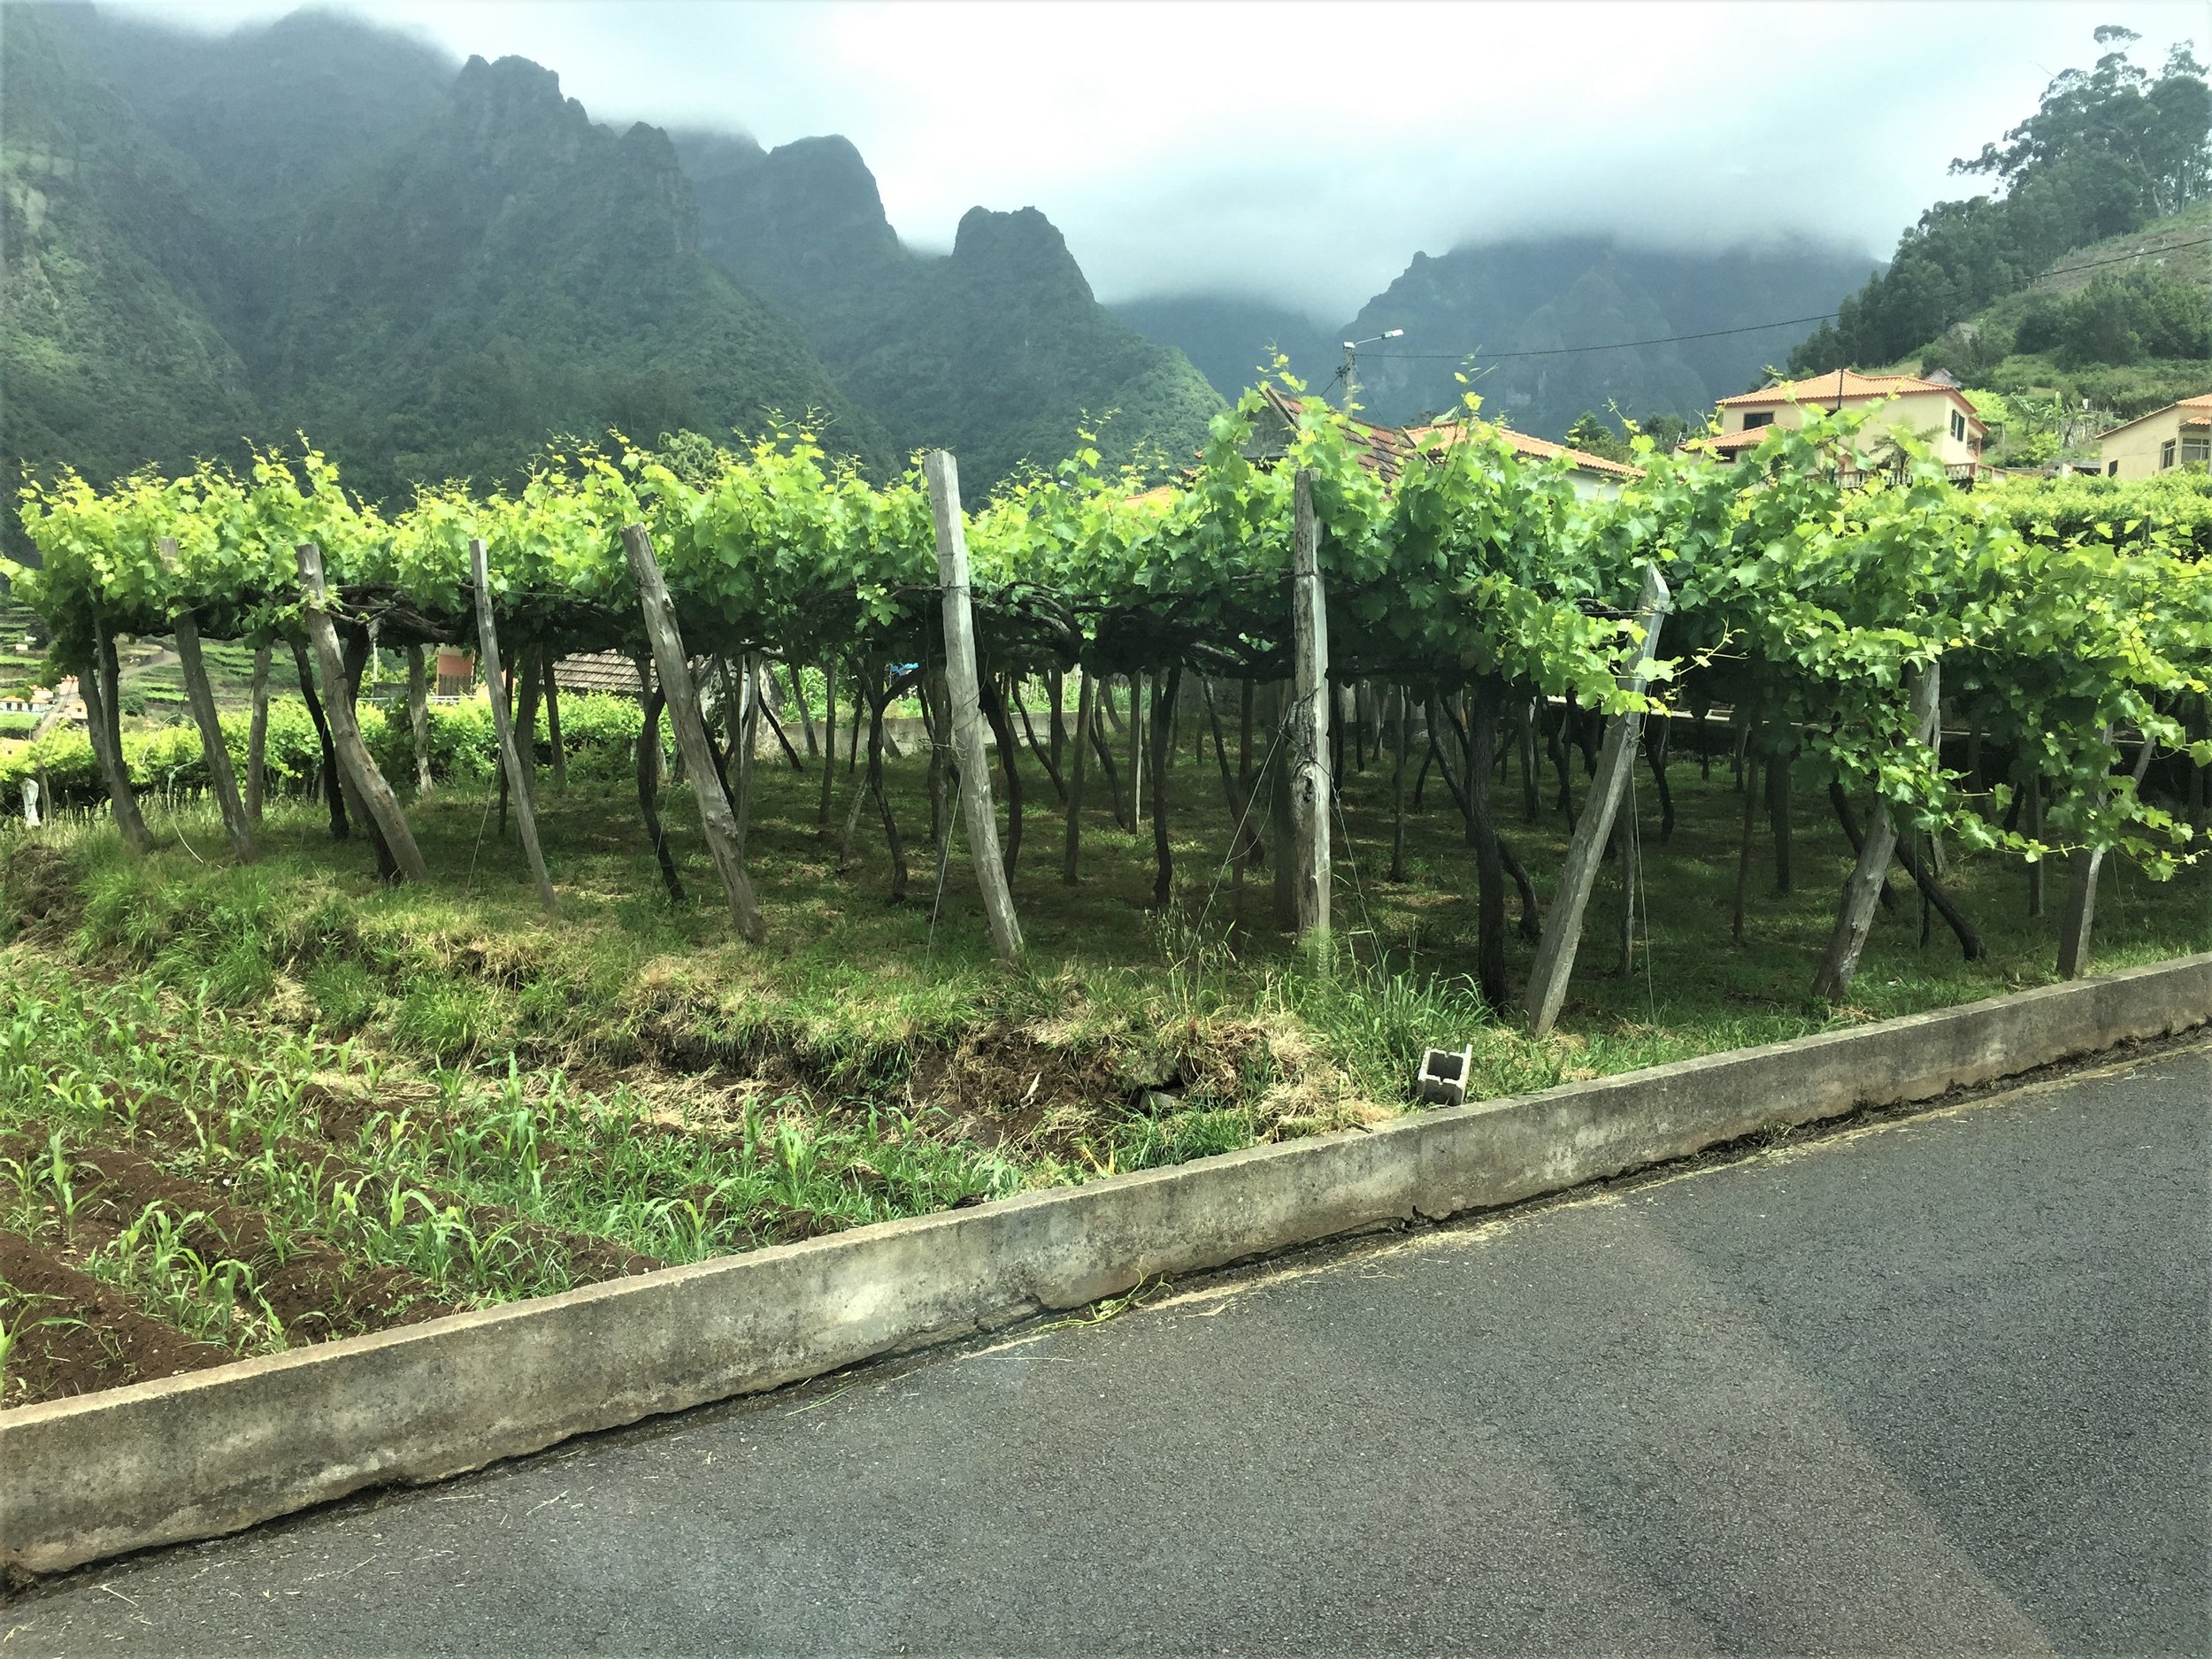 The wine grapes growing in Madeira